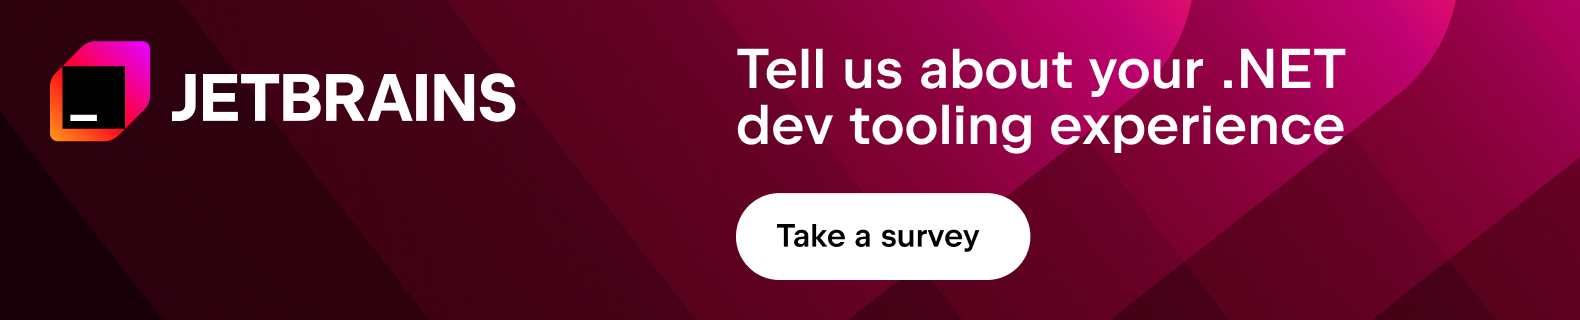 Participate in our survey for the chance to win a prize!